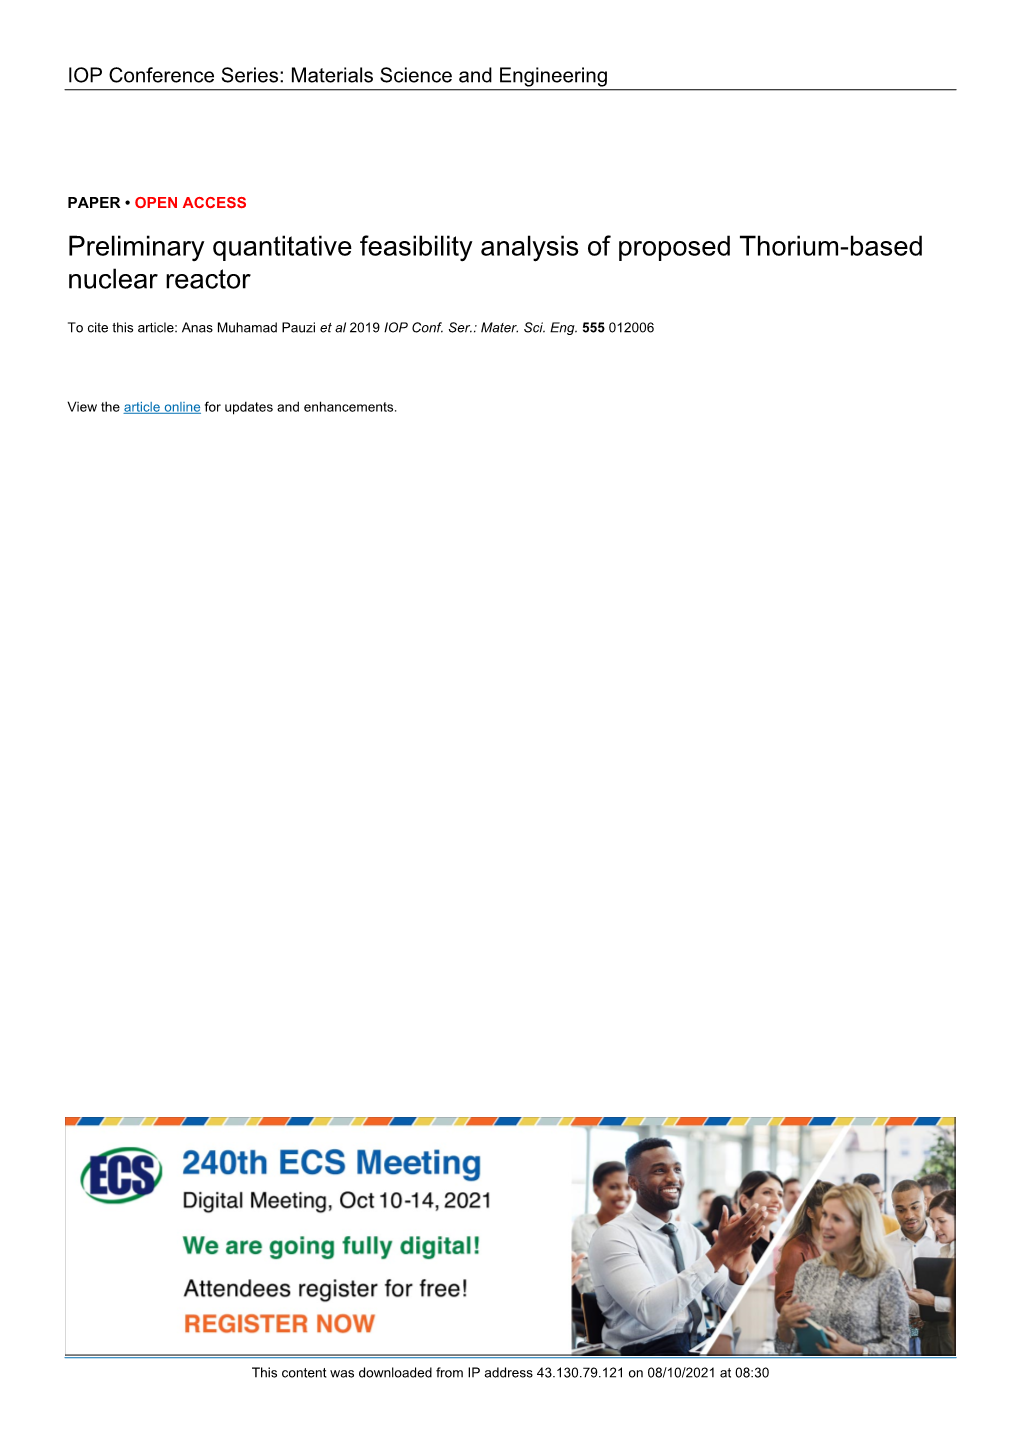 Preliminary Quantitative Feasibility Analysis of Proposed Thorium-Based Nuclear Reactor